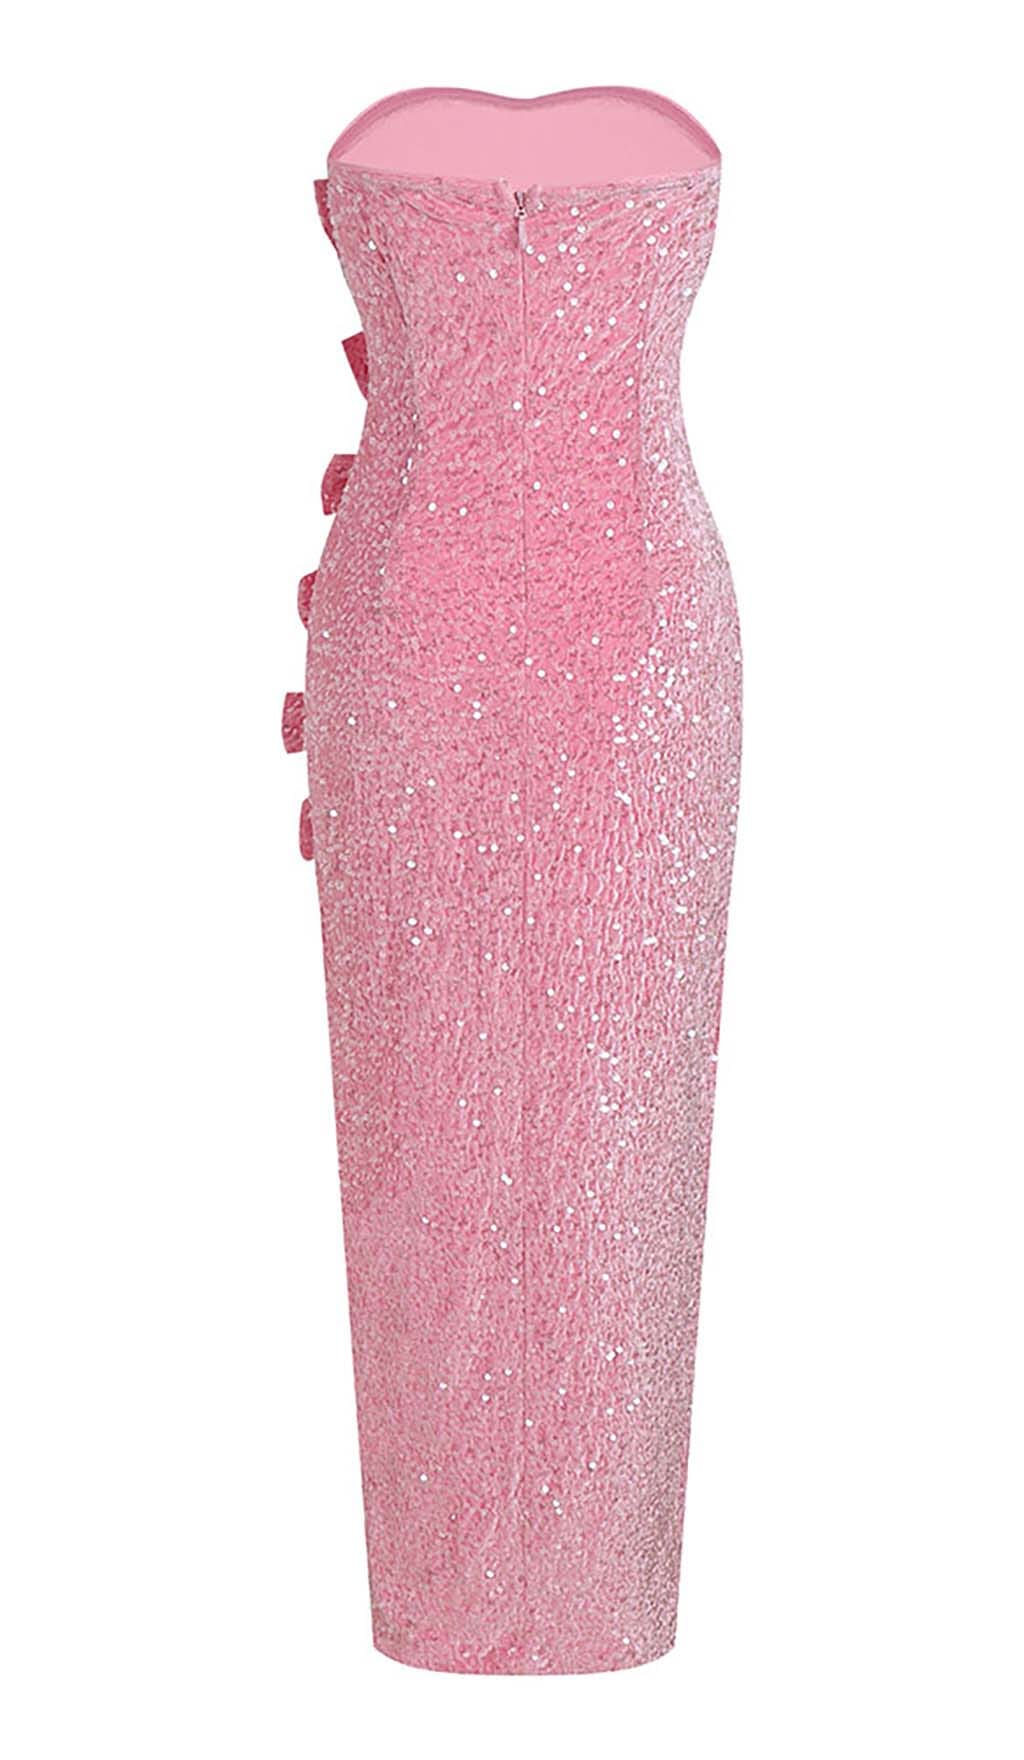 BOW DETAIL SEQUIN MAXI DRESS IN PINK